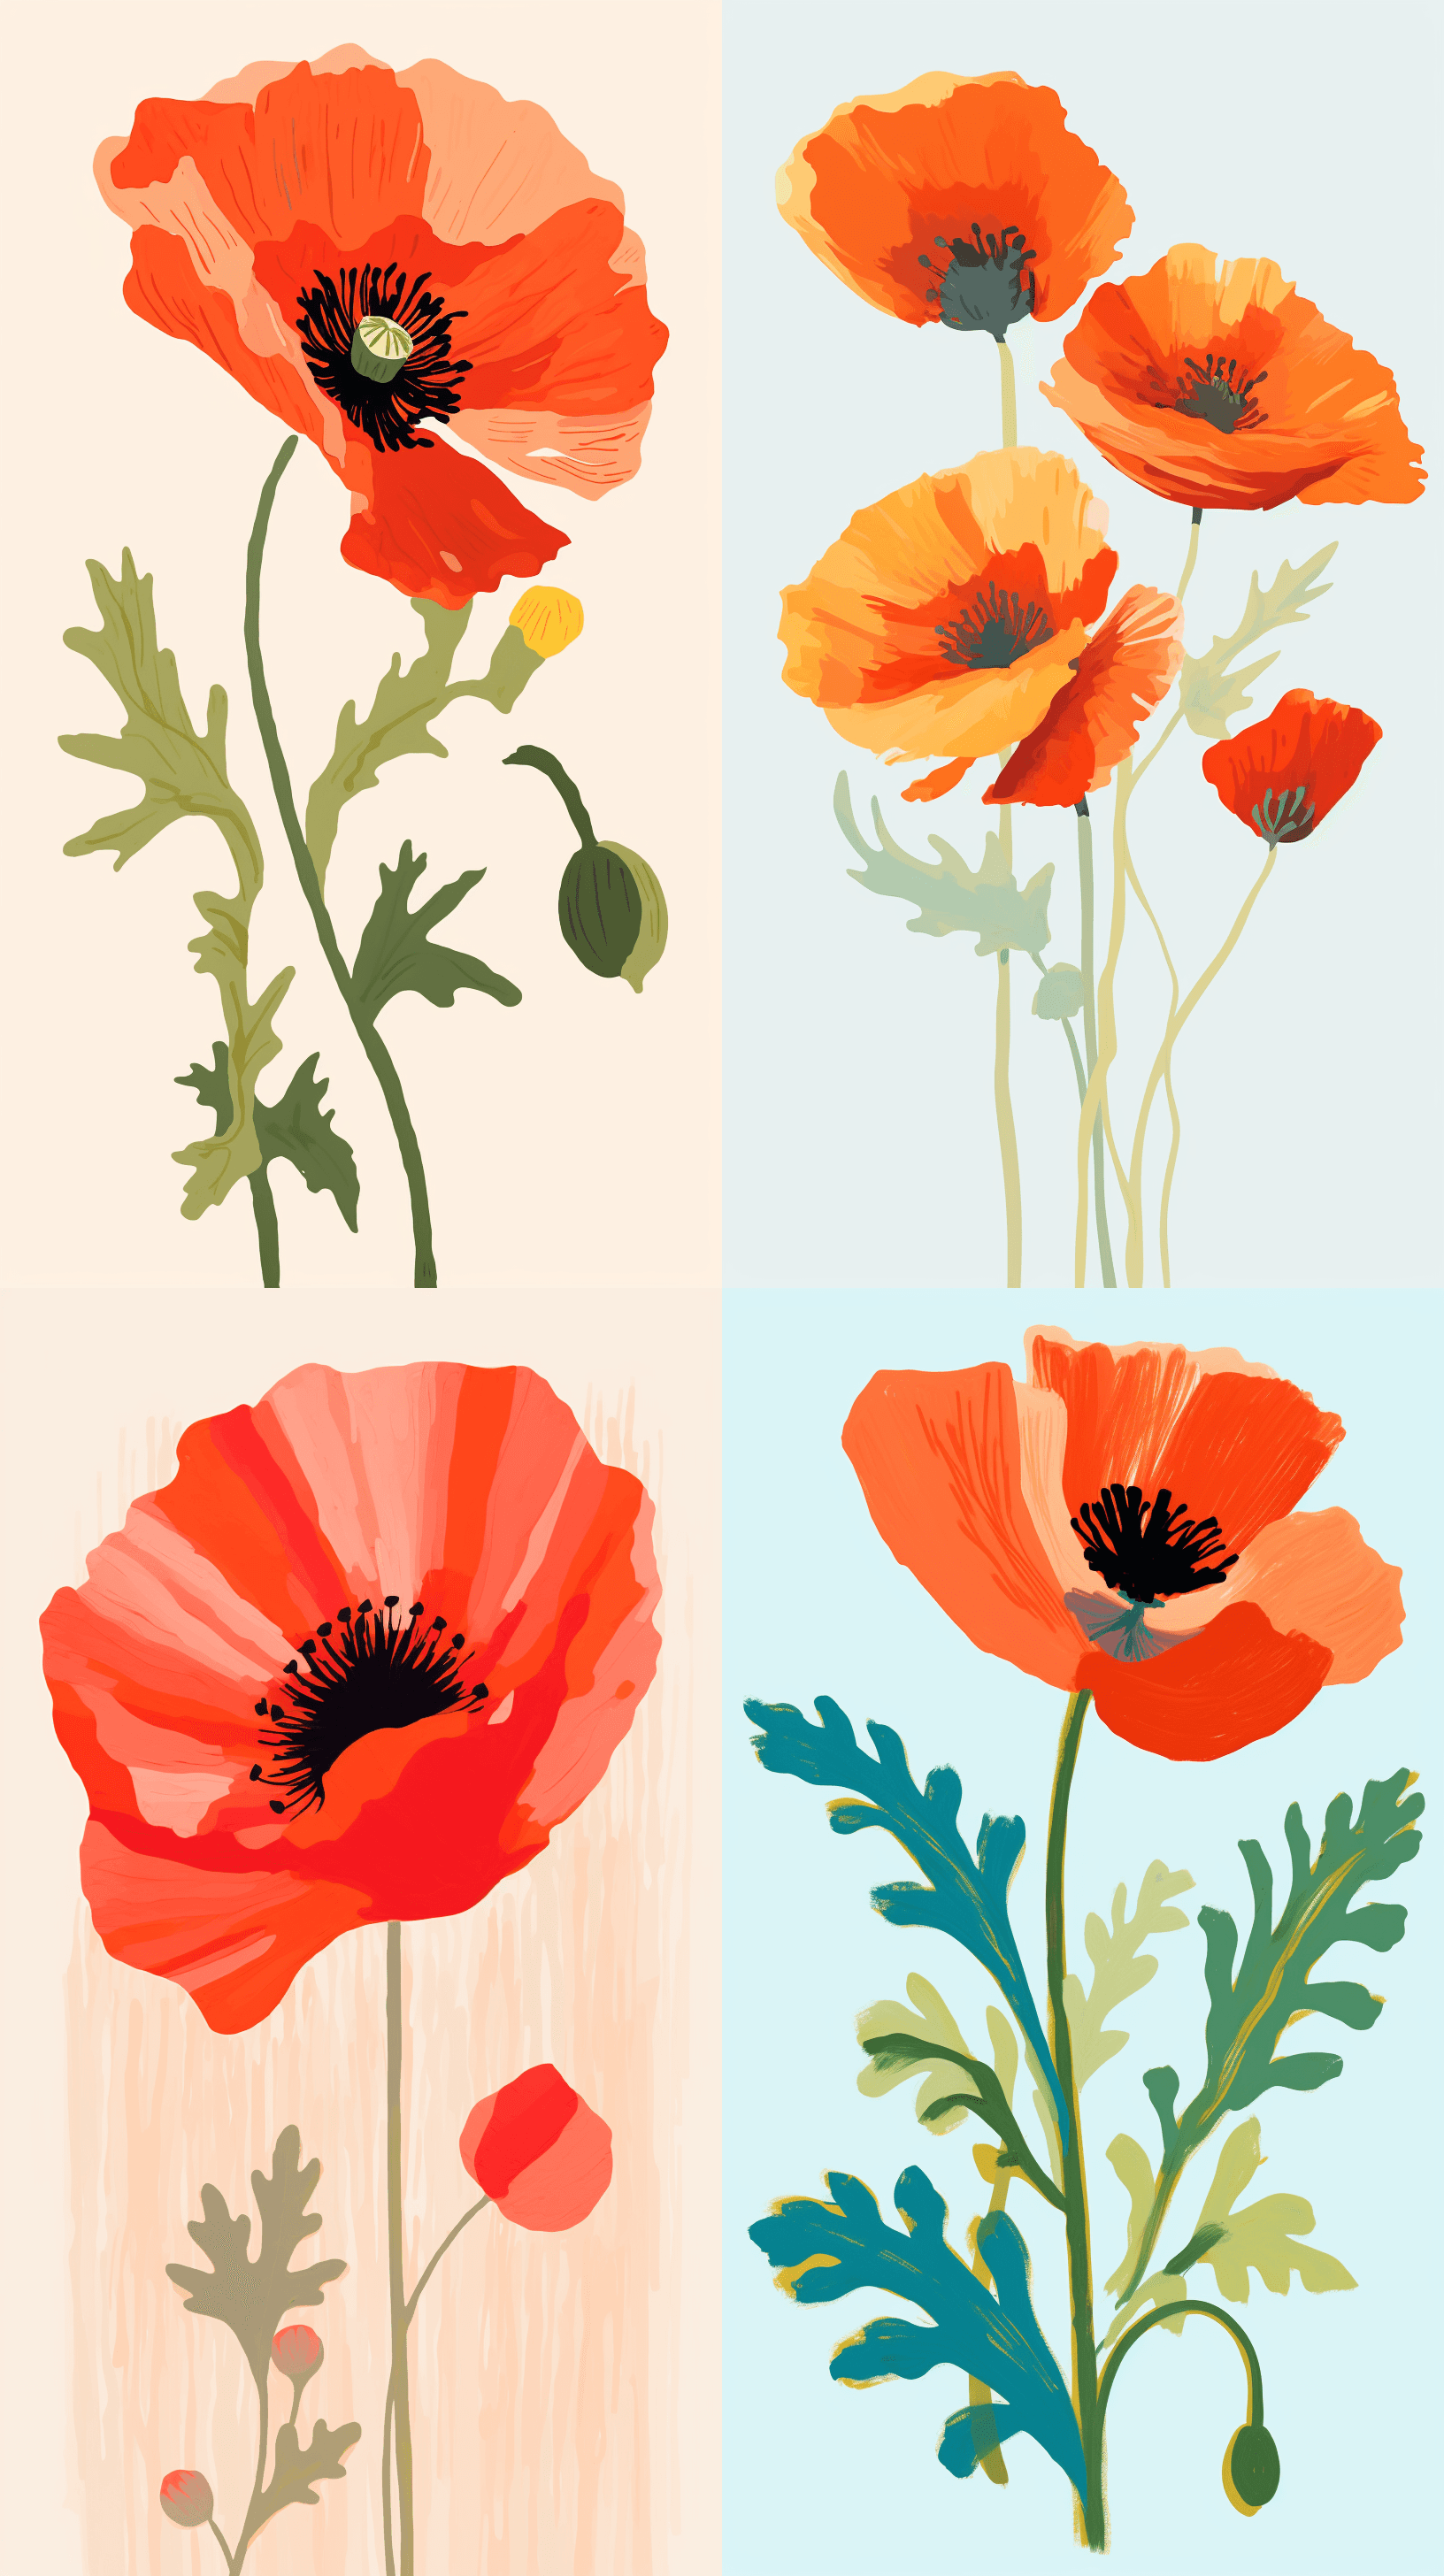 Poppy Flower, Mogu painting, botanical illustration, hand-drawn illustration, exploration, soft, hazy brushstrokes, playful brushstrokes, emotionally-charged brushstrokes, free brushwork, historical, Etel Adnan, Van Gogh, Monet, Naive Art, Children, simple and clean background, in the style of light orange and light blue, patrick brown, high resolution, vibrant use of light and shadow, influenced by ancient chinese art, naturalistic painter, few few details --ar 9:16